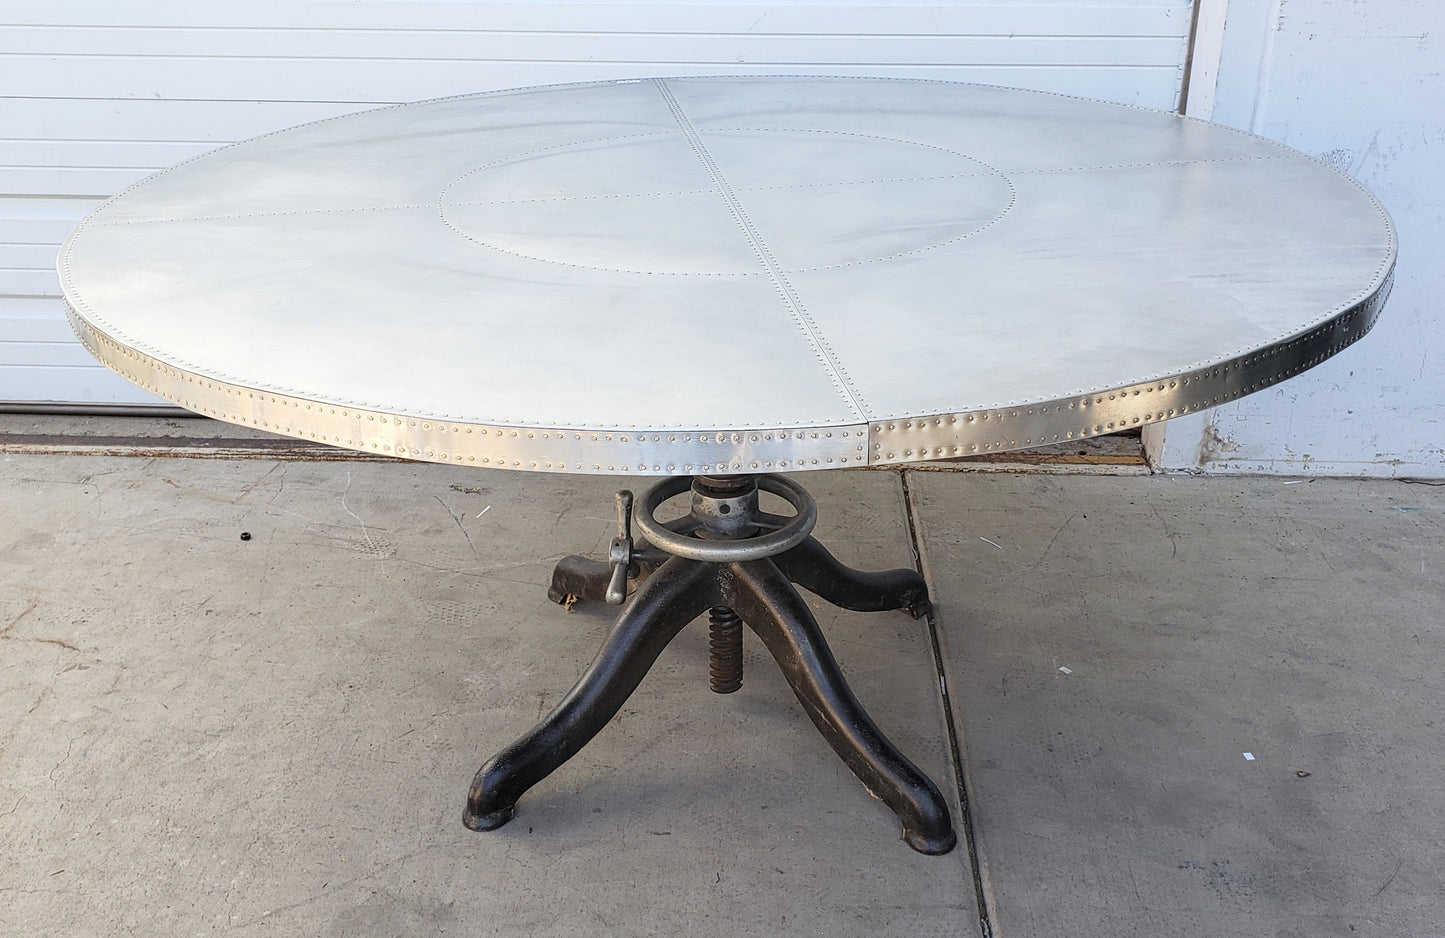 60" Riveted Stainless Steel Dining Table